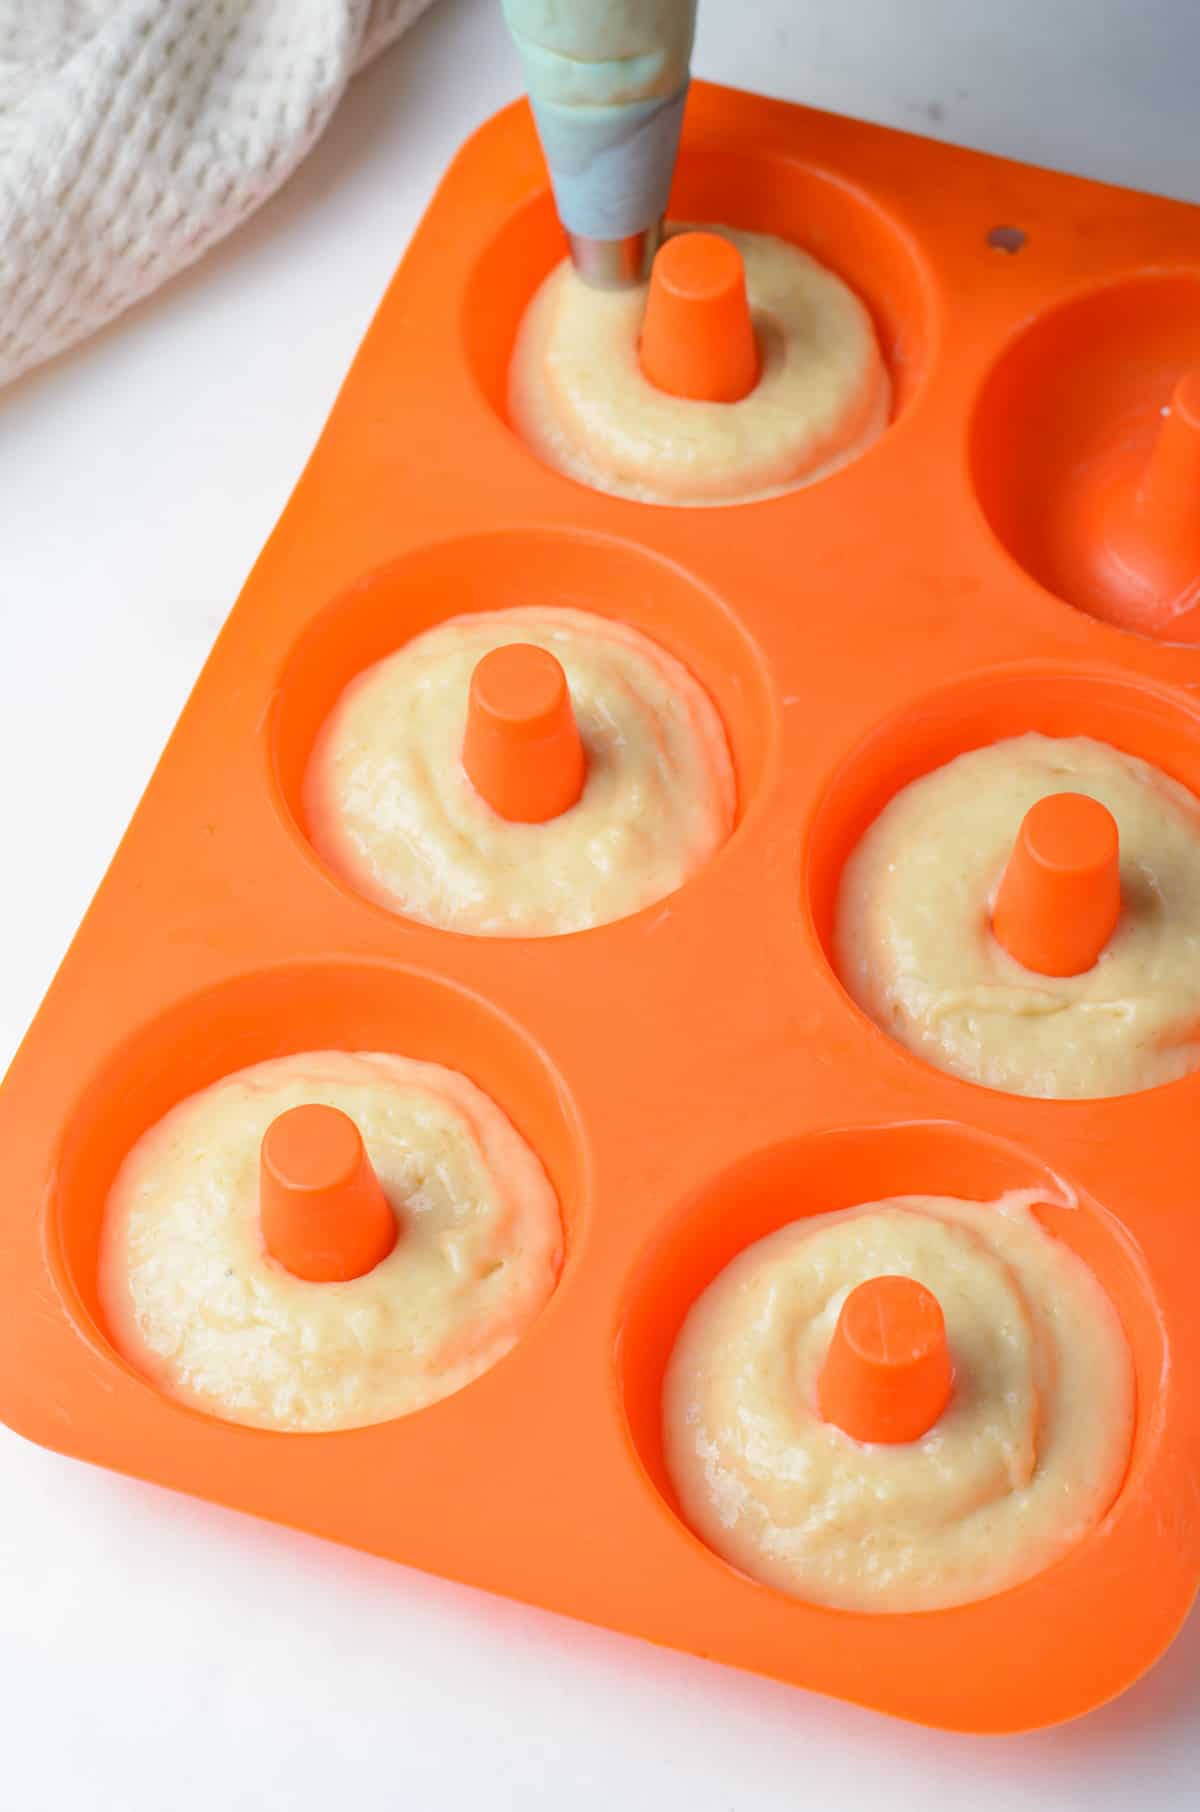 fill the donut pan with batter